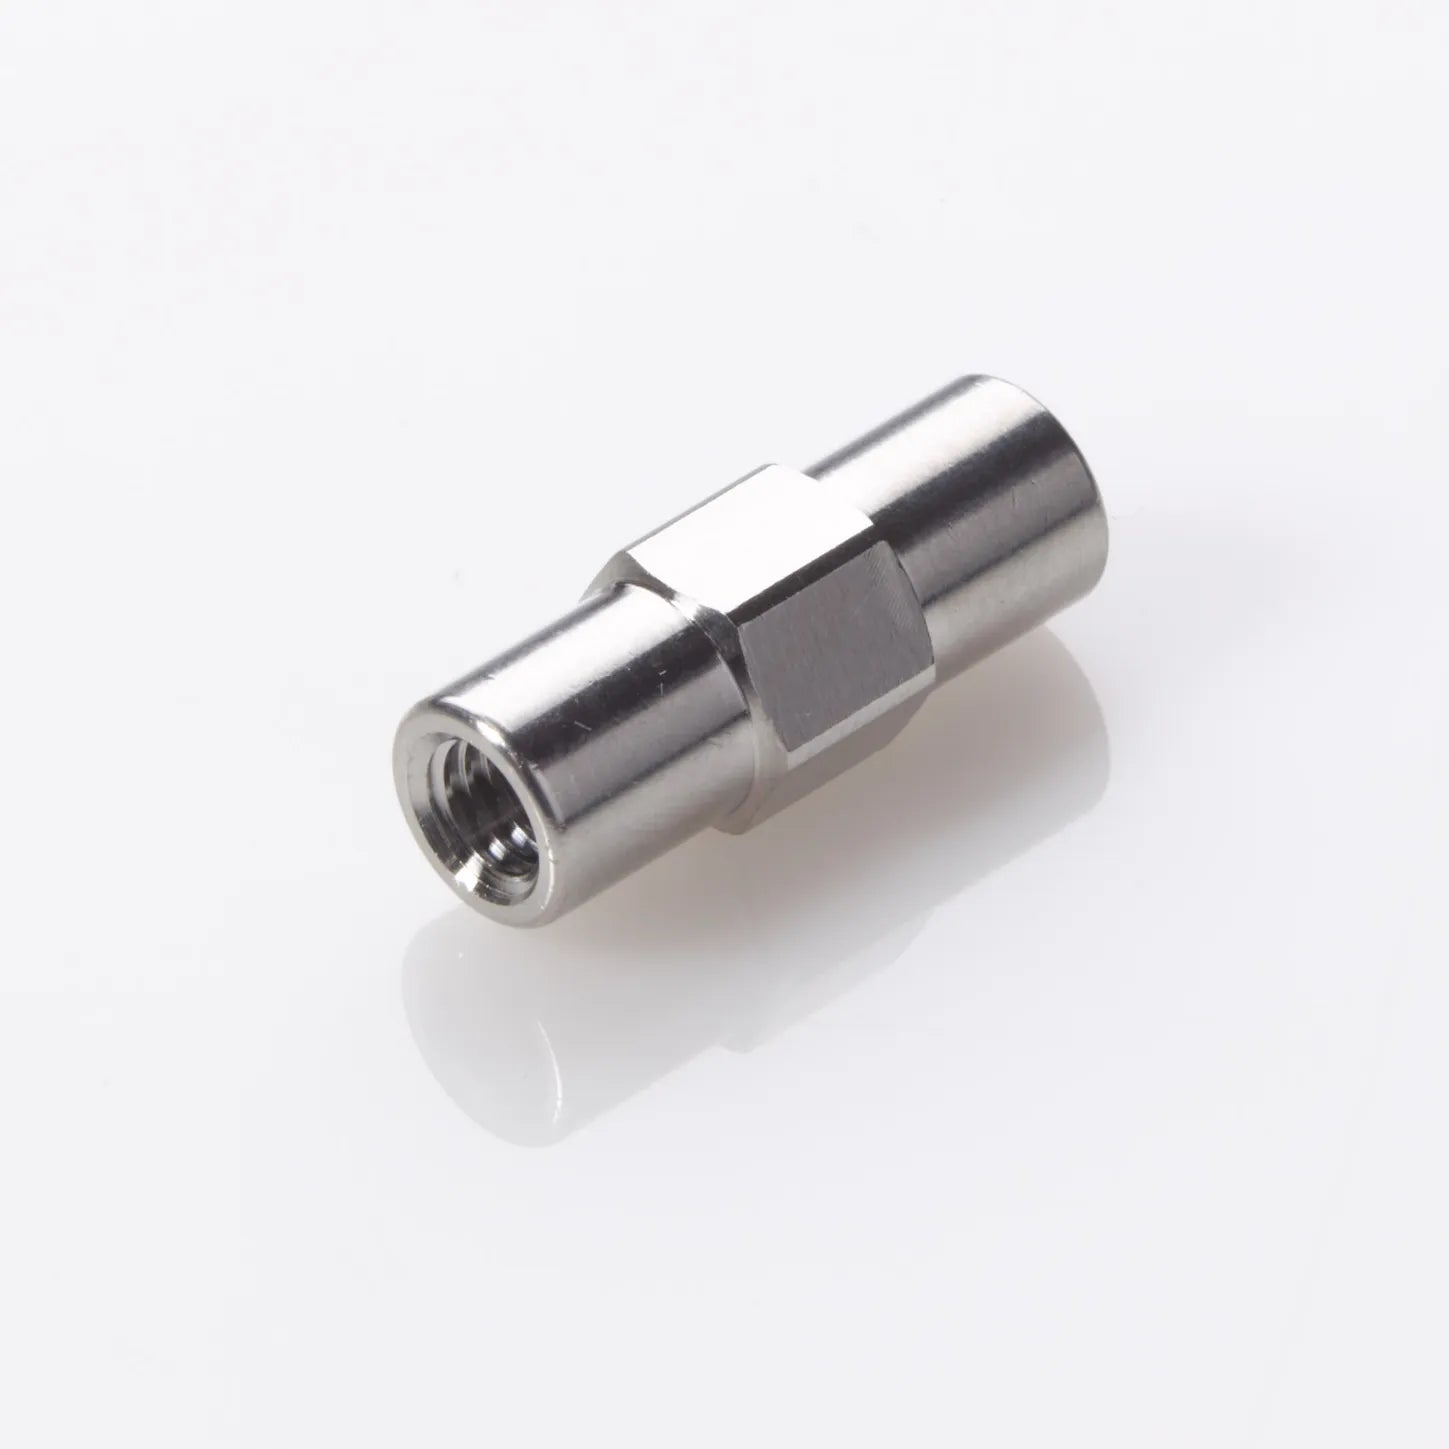 Connector Union ZDV Stainless Steel 0.020" (0.50mm) Thru-Hole for 1/16" OD Tubing (Union Body Only)